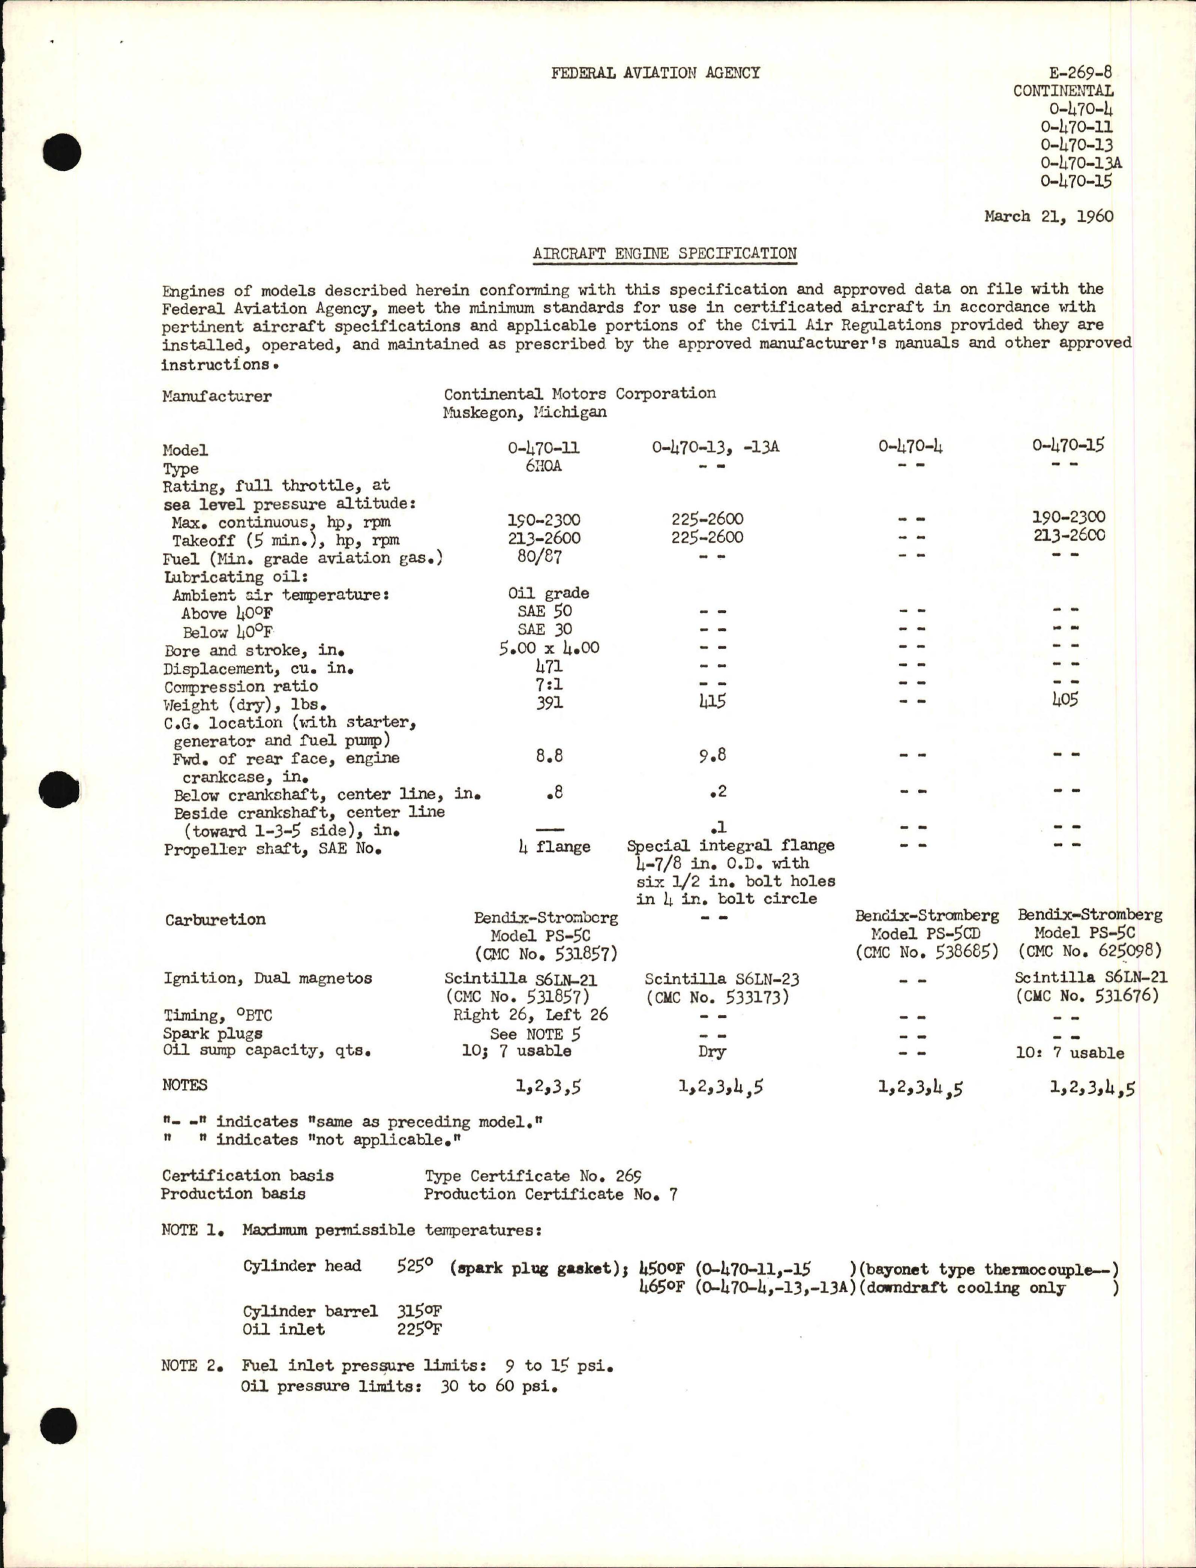 Sample page 1 from AirCorps Library document: O-470-4, -11, -13, -13A, and -15